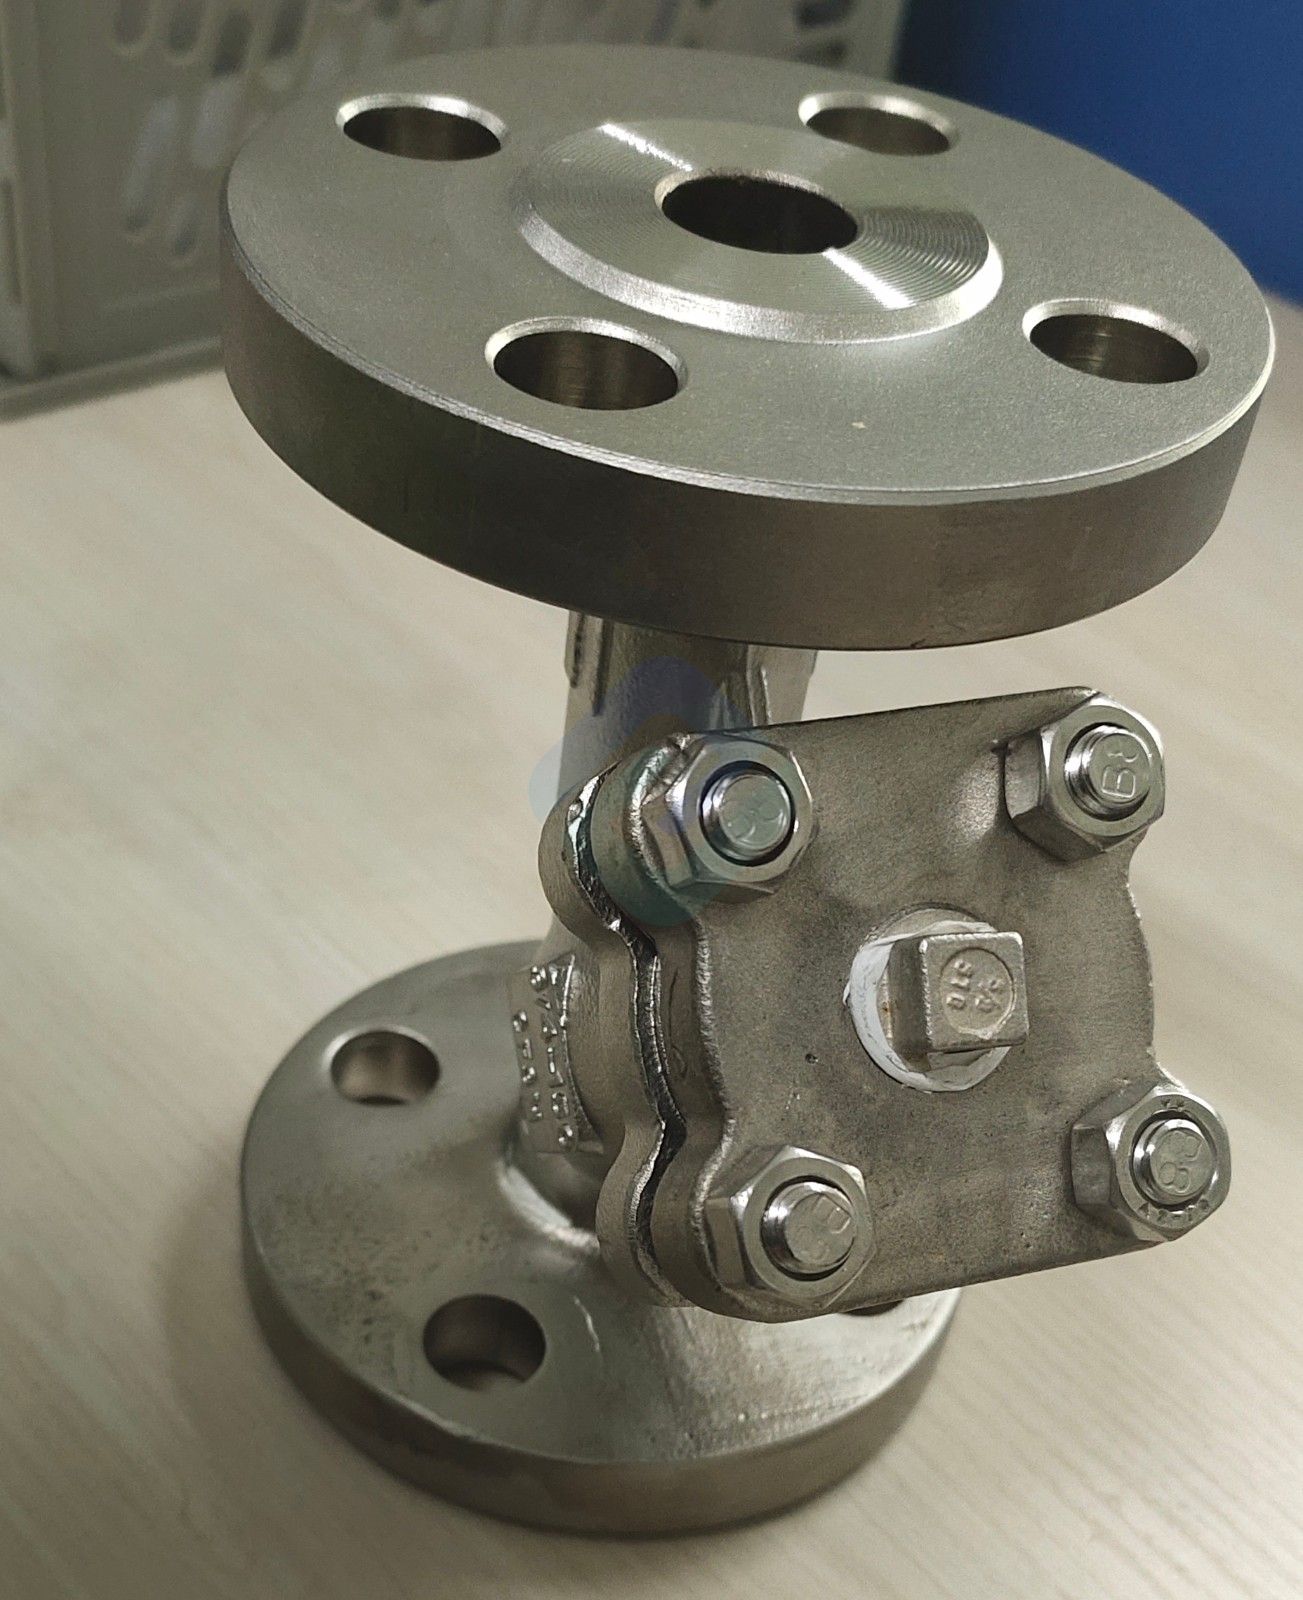 Stainless steel Y-type strainer with acid and corrosion resistant flange connection for petrochemical applications